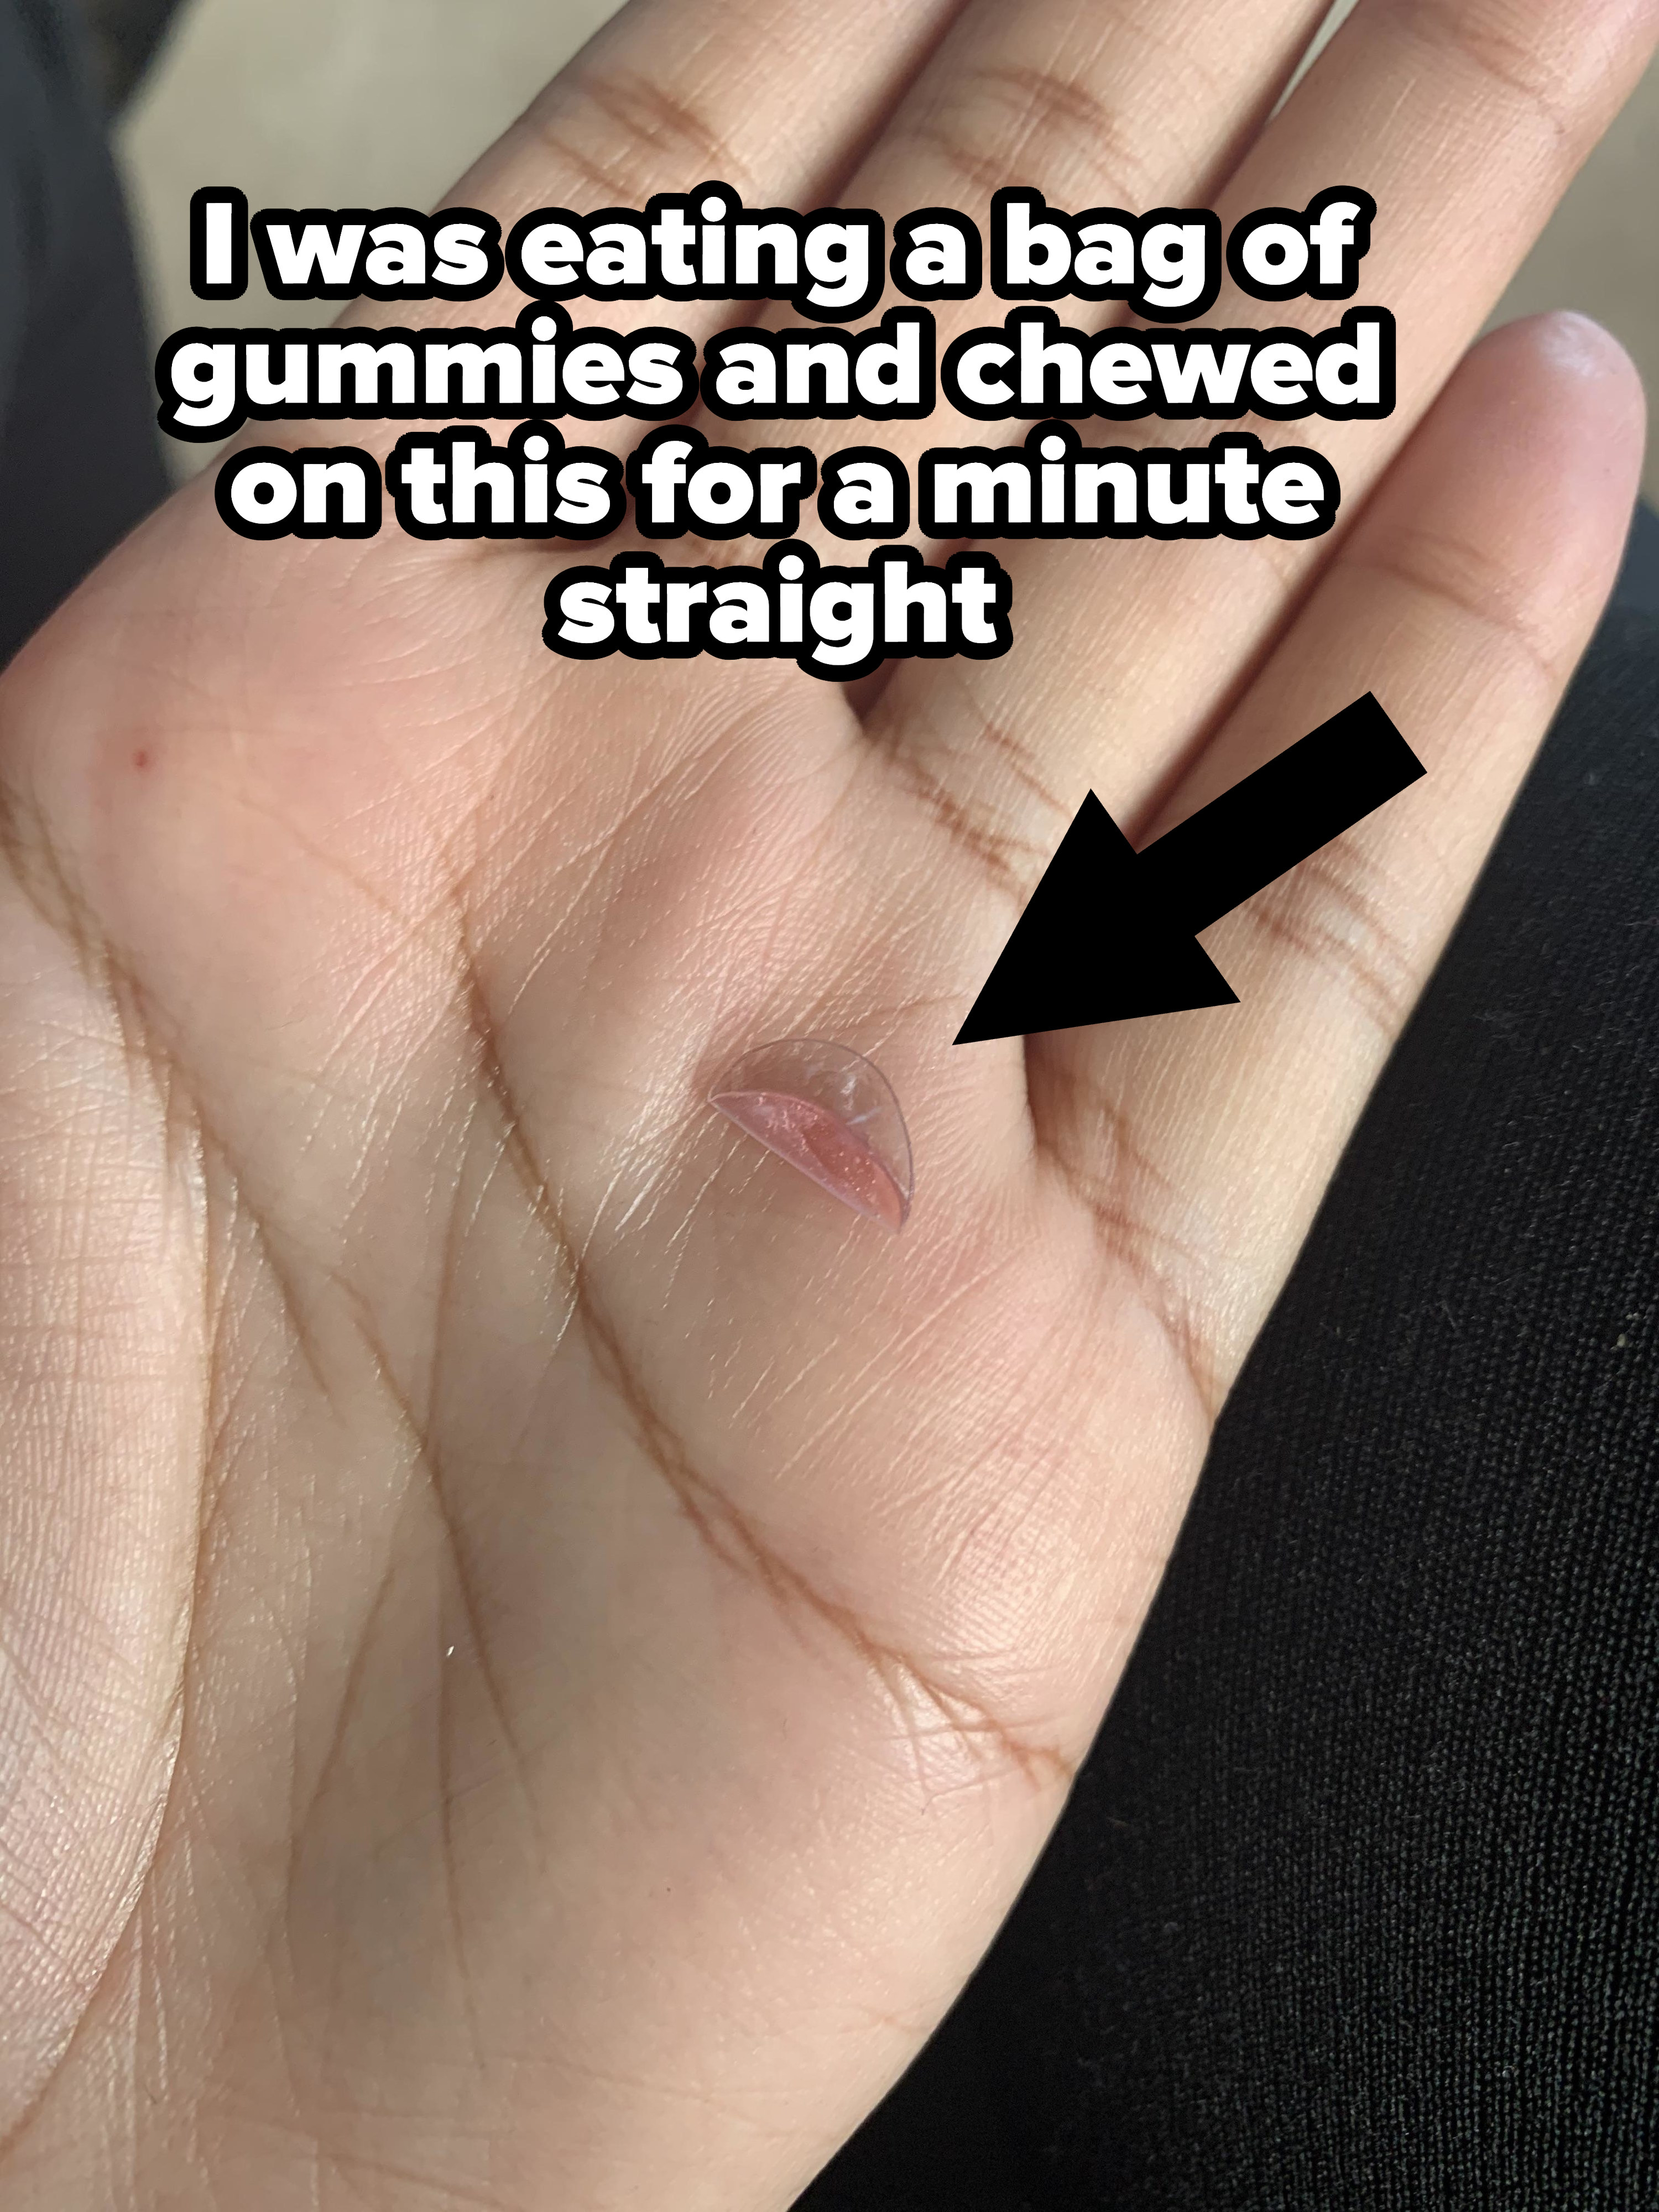 A person holding a squashed contact lens they were chewing on that they found in a bag of gummies